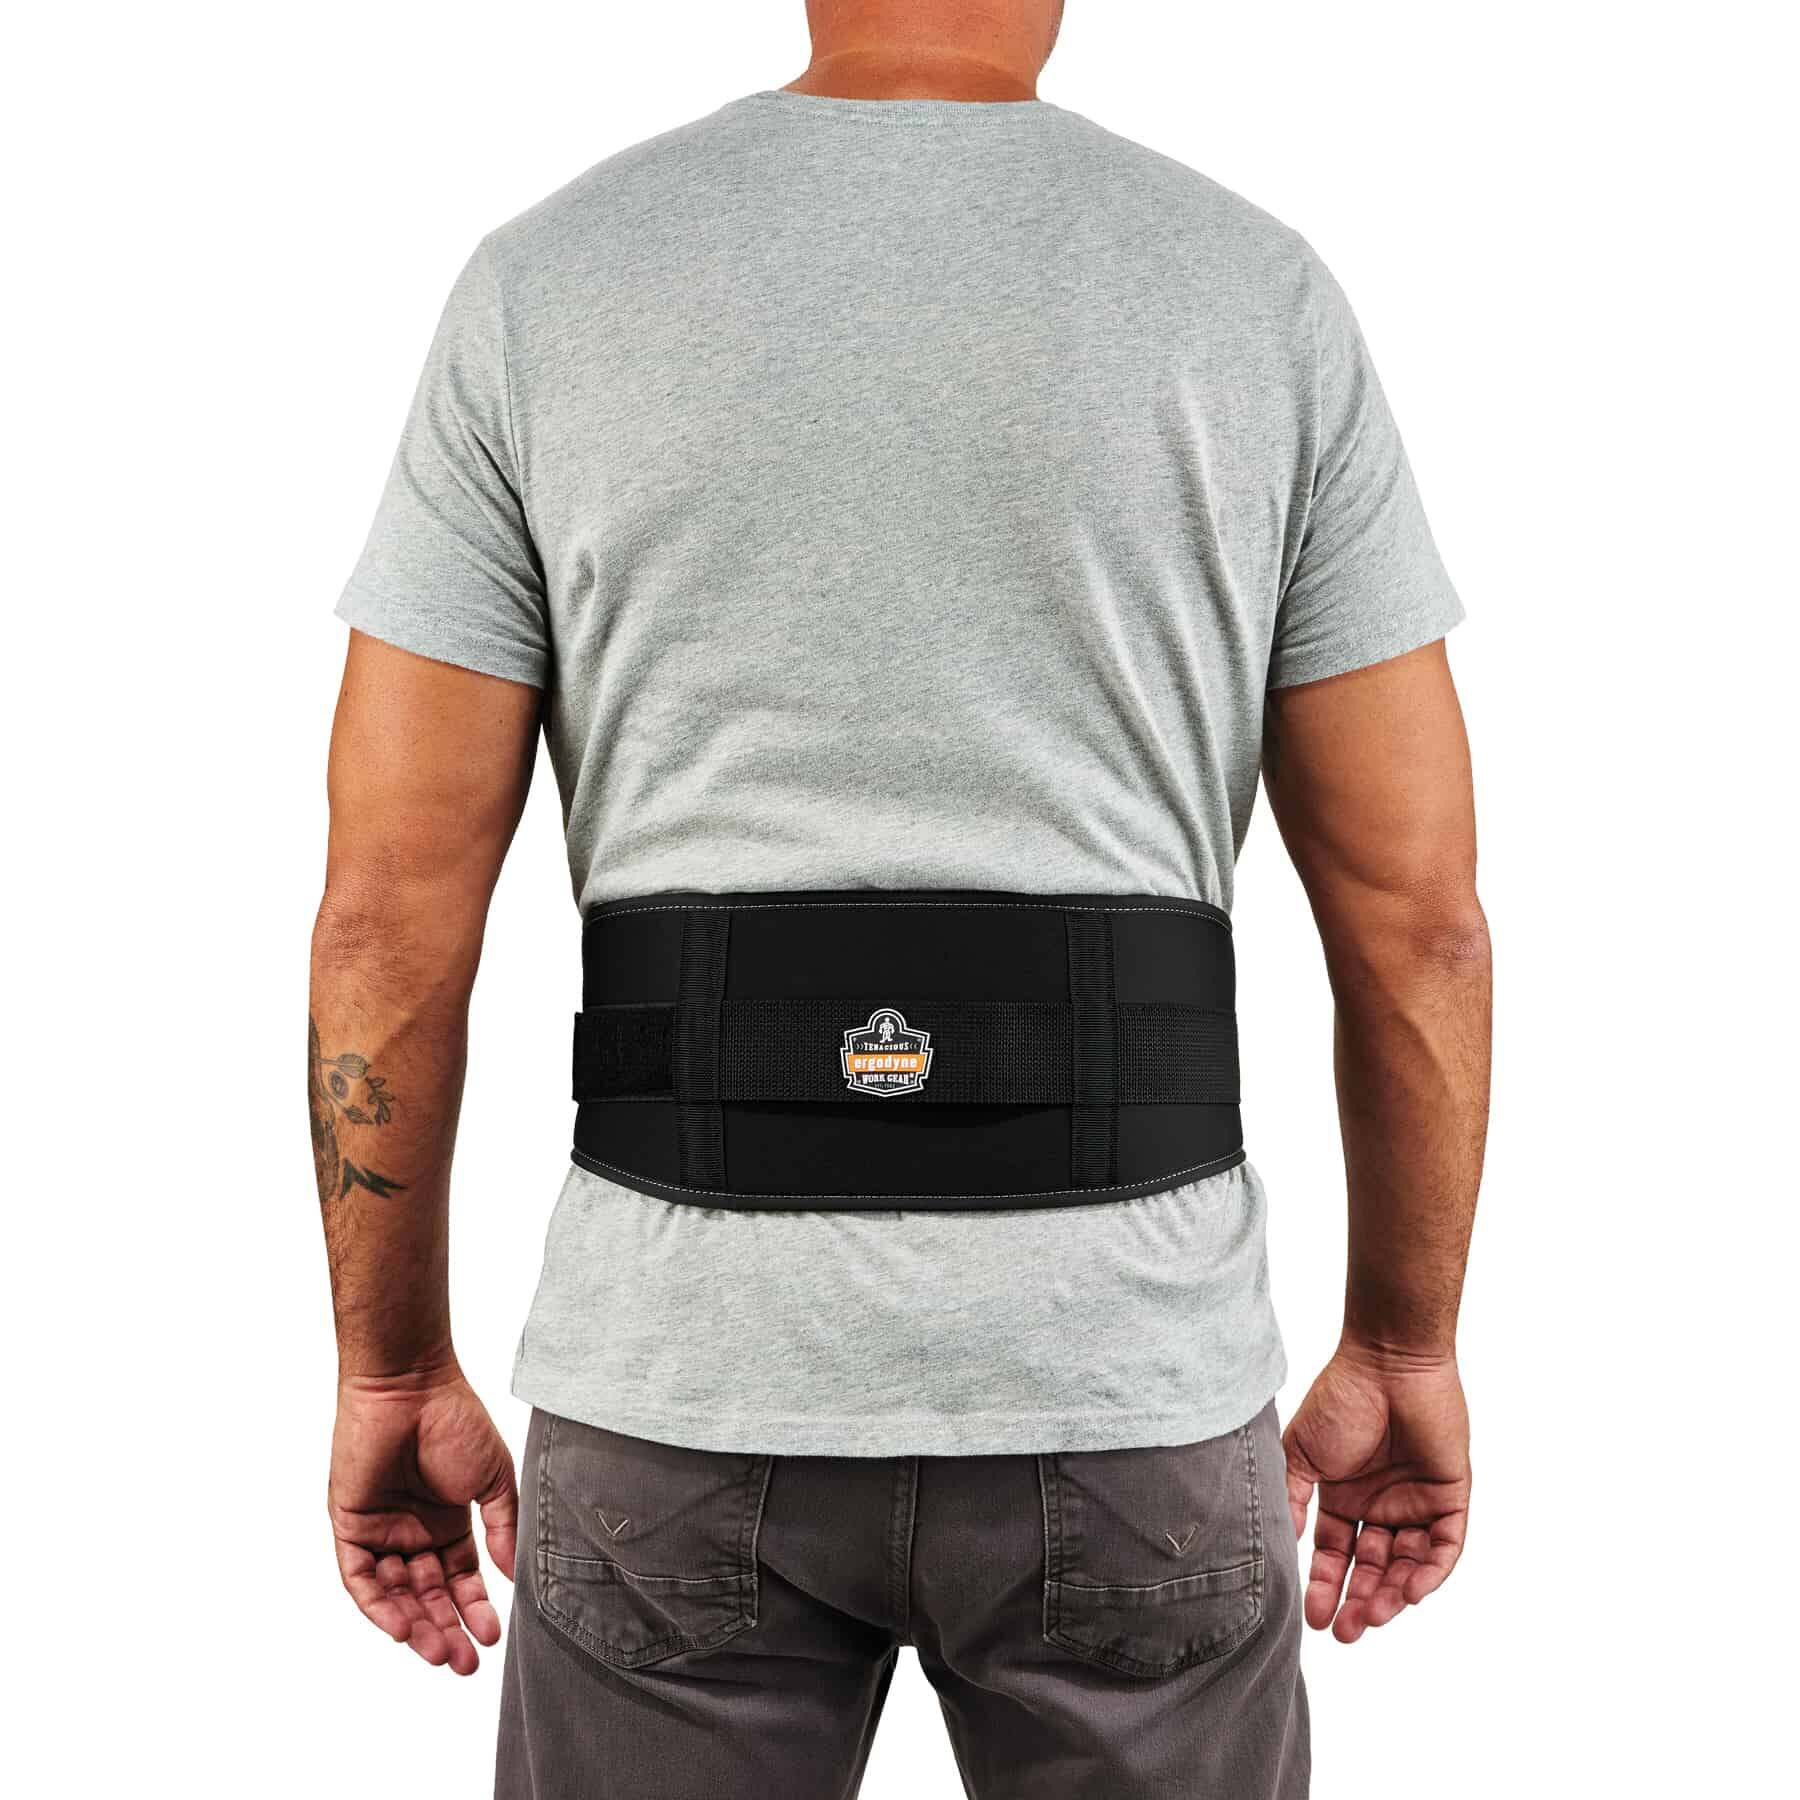 Weight Lifting Back Support, Low Profile, Back Brace